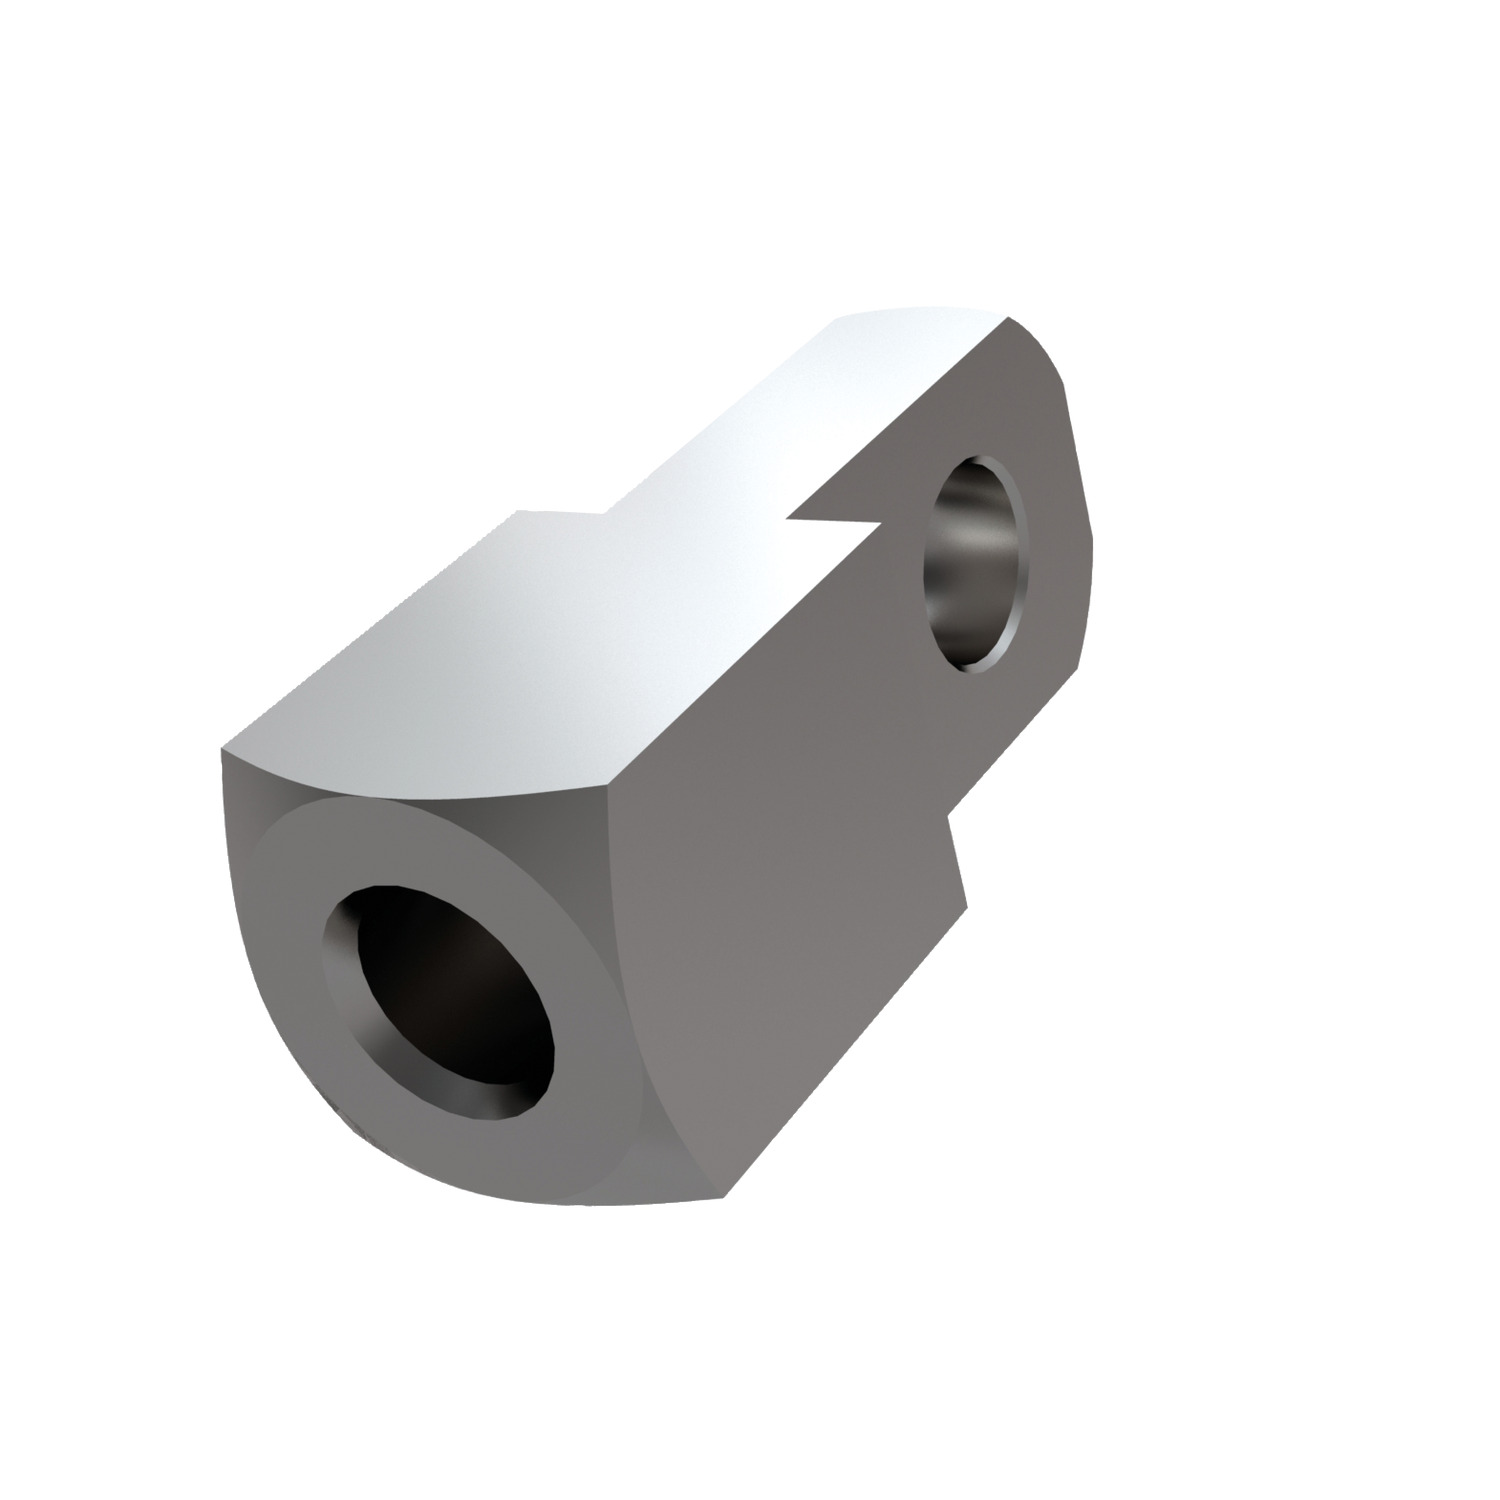 Stainless Mating Piece for Clevis Joints Stainless steel female mating piece designed for use with our stainless steel clevis joints.